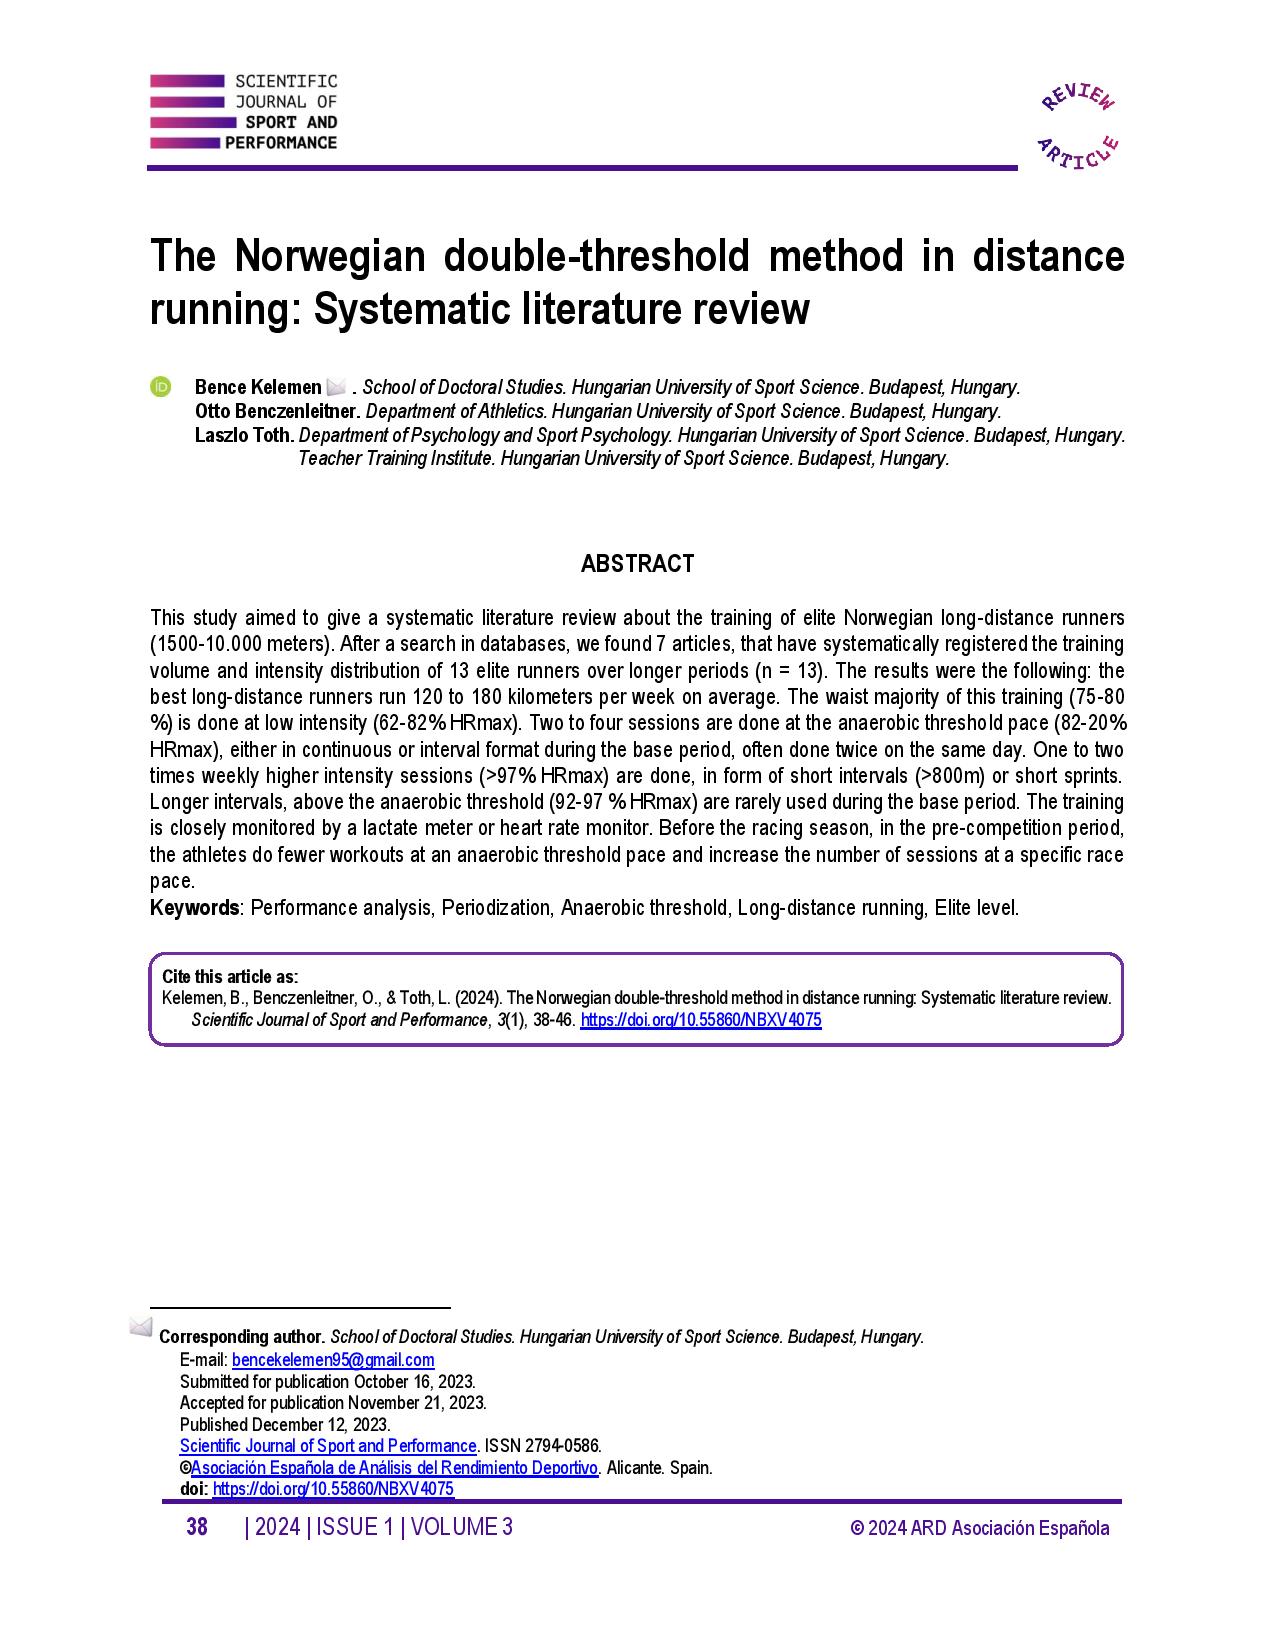 The Norwegian double-threshold method in distance running: Systematic literature review